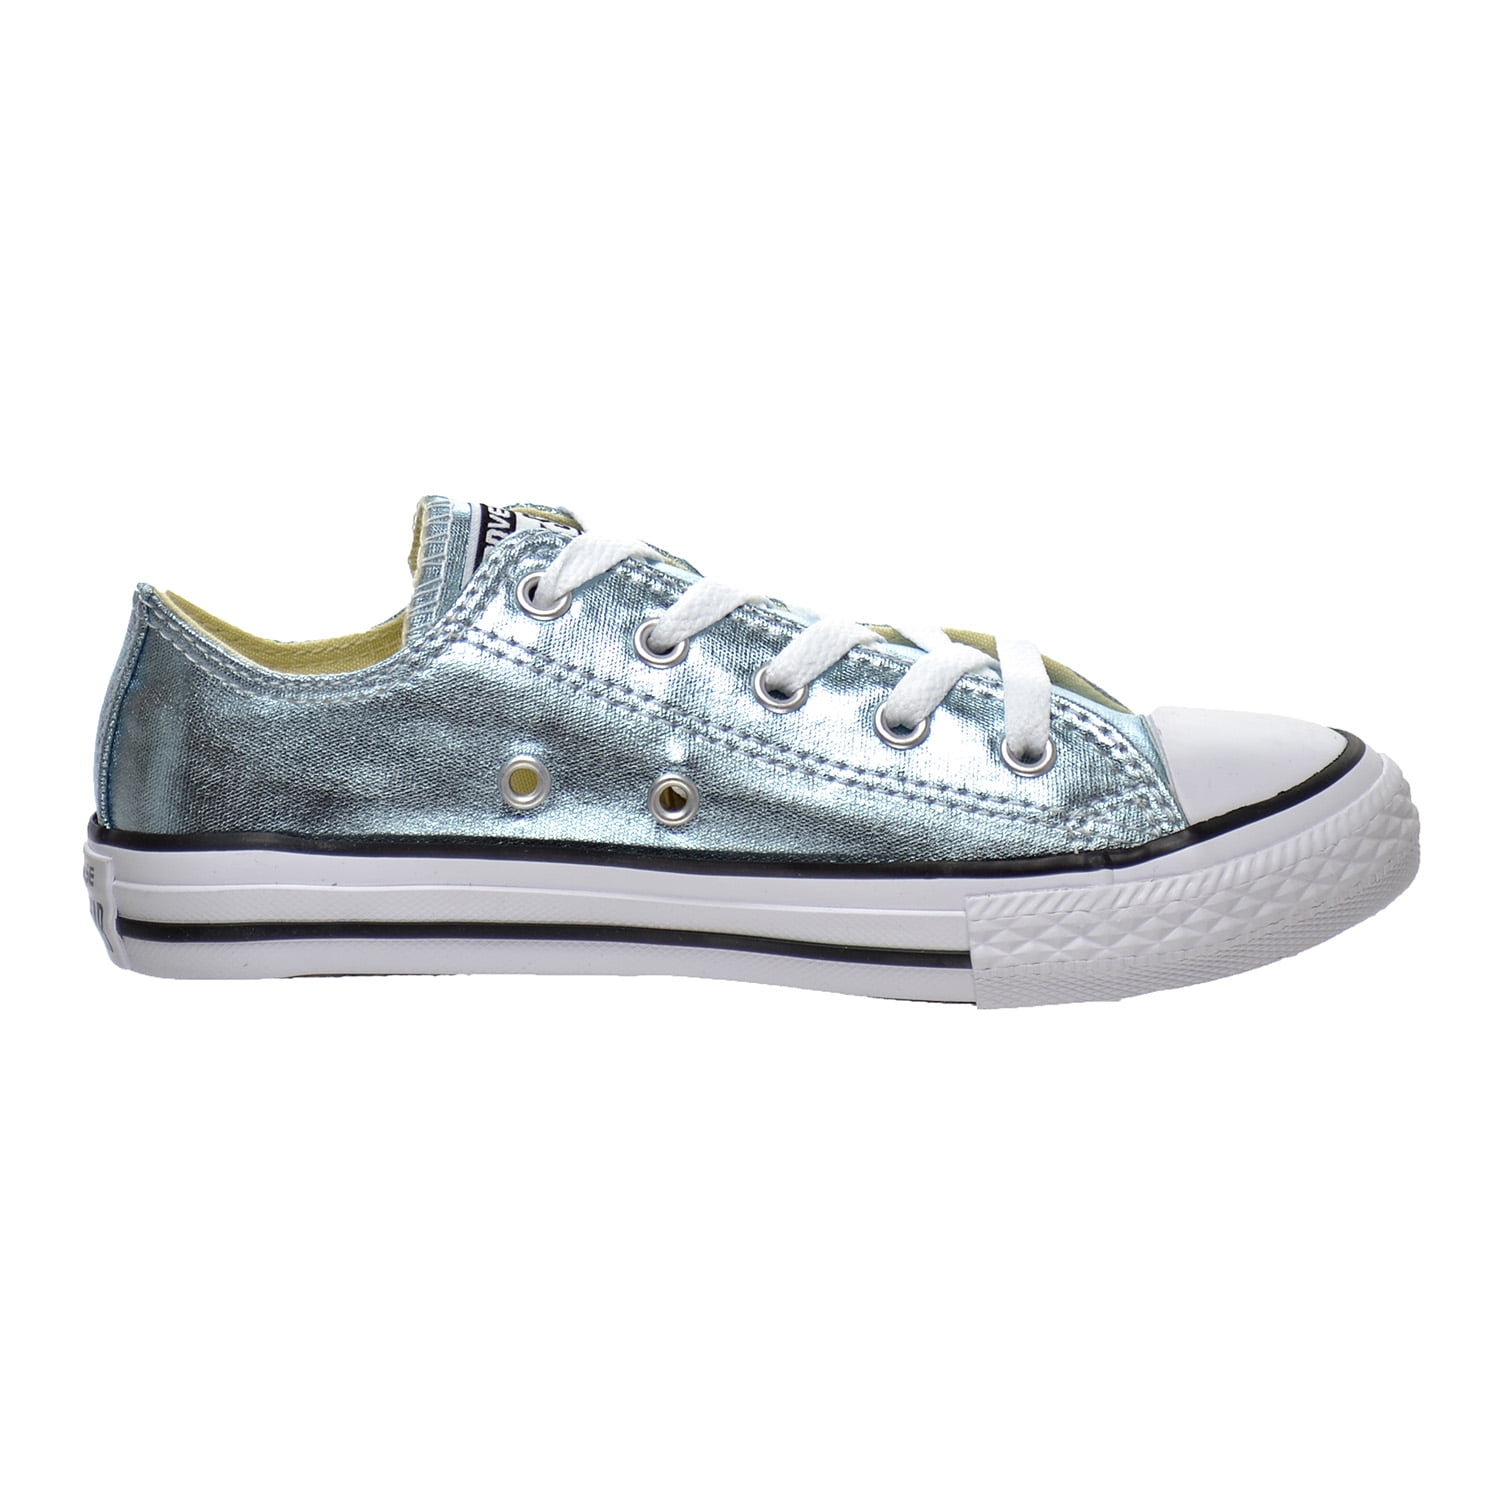 converse all star ox quilted metallic